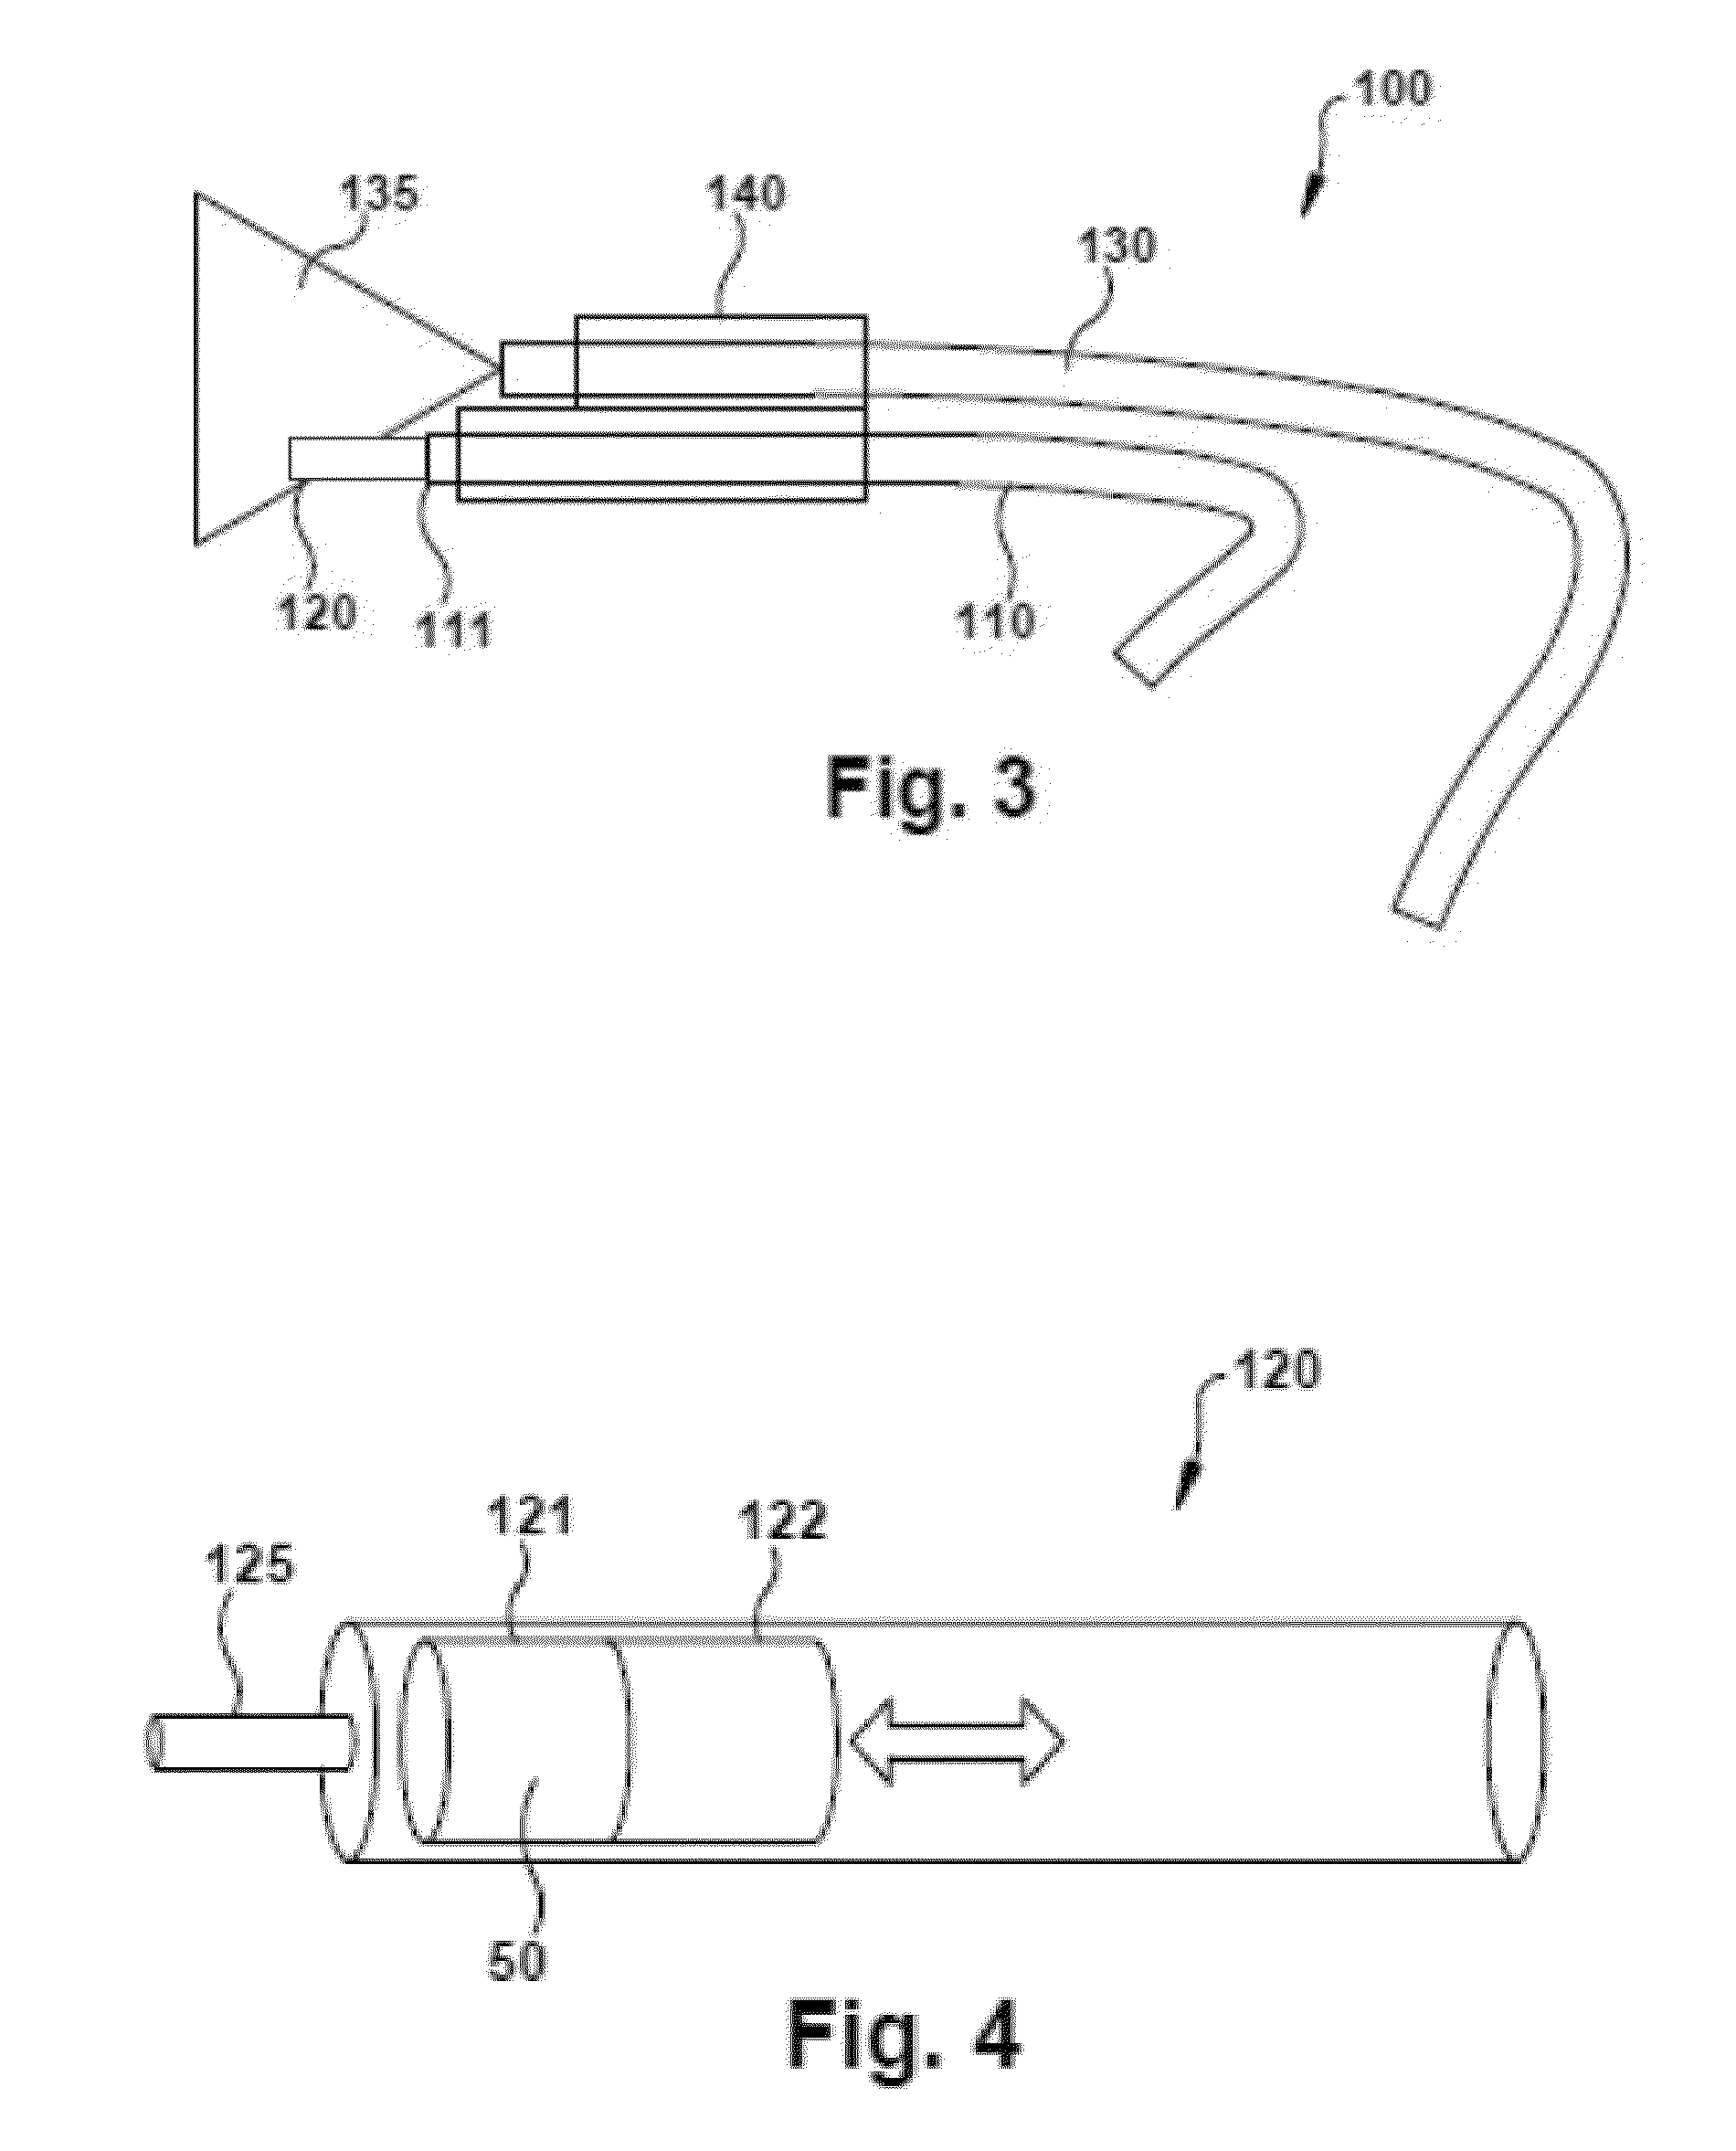 Turbine component patch delivery system